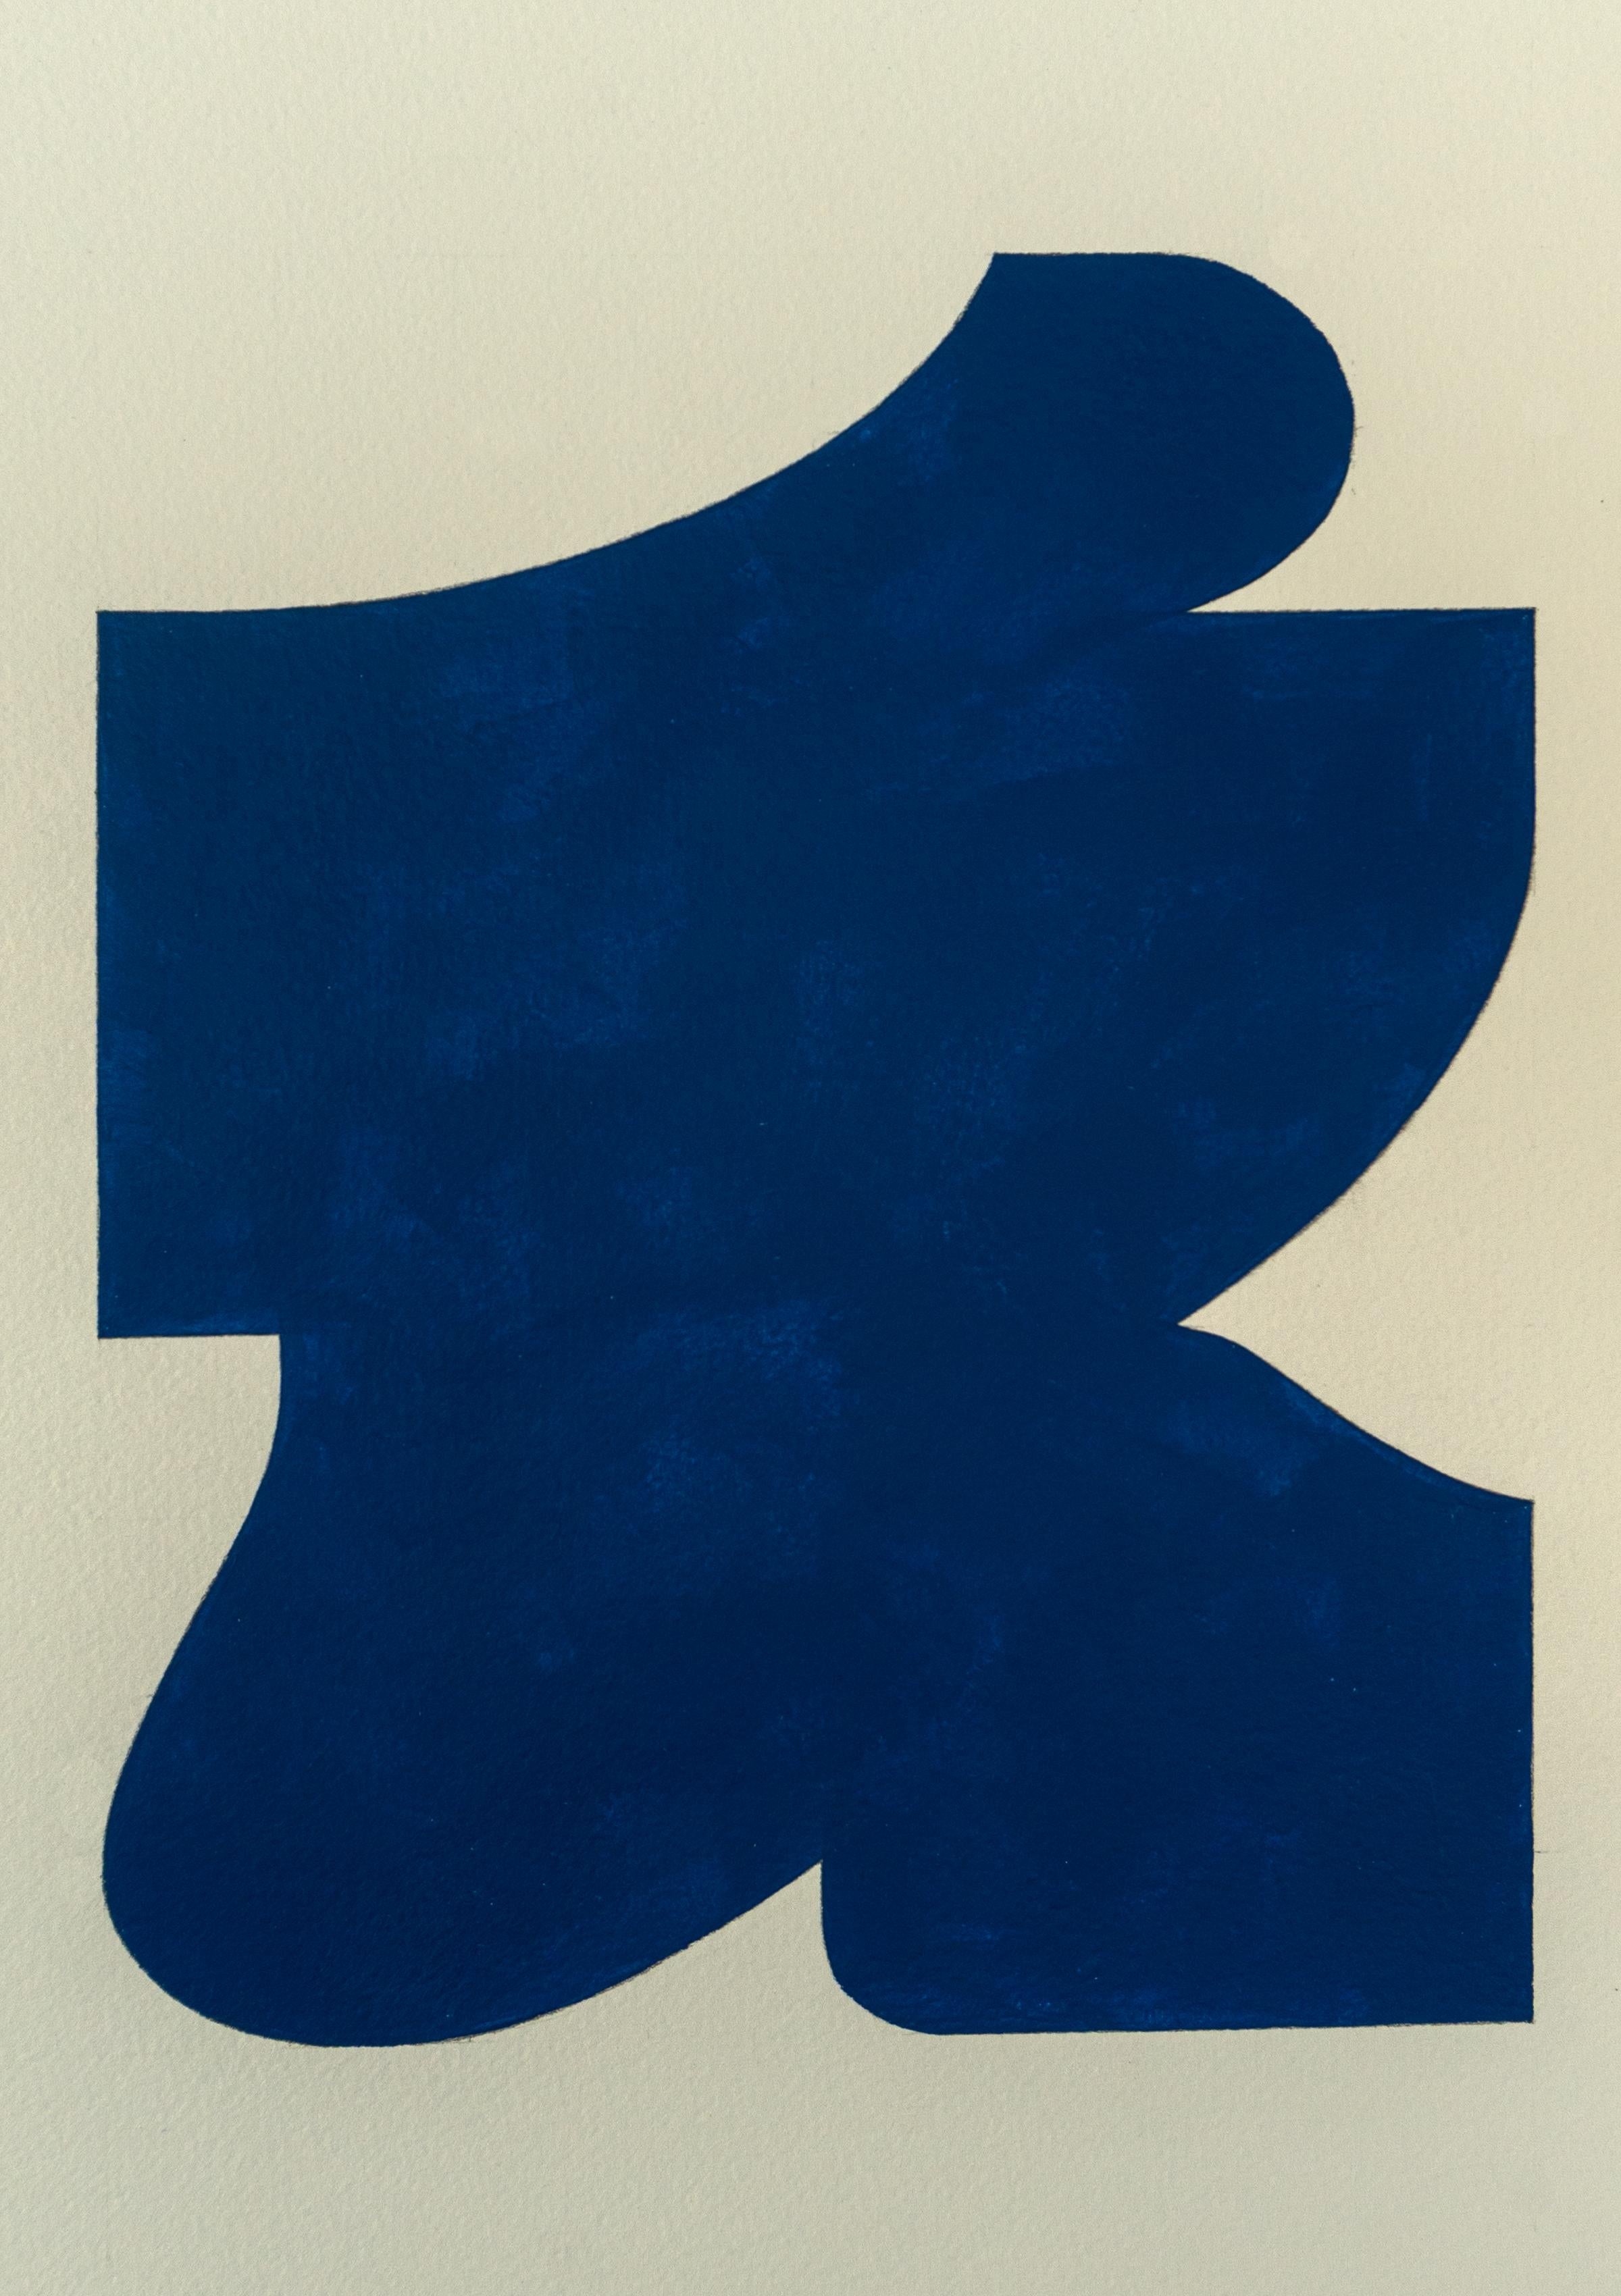 Shape 43 (2019) - Abstract shape, work on paper, minimalist, navy blue - Painting by Ryan Park